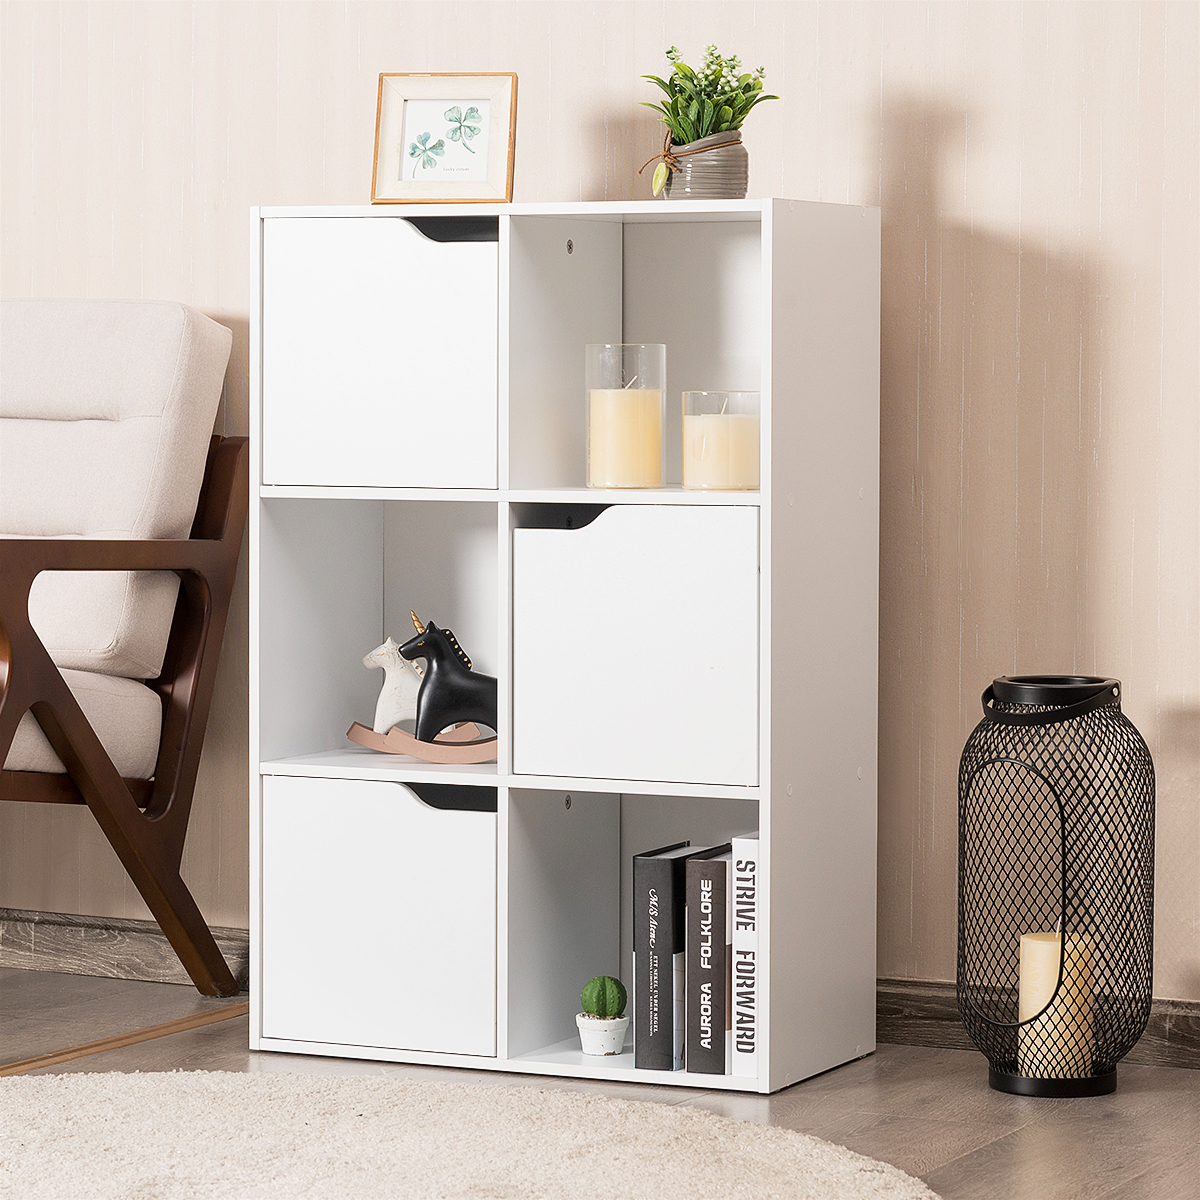 Costway 6 Cube Bookcase Cabinet Wood Bookcase Storage Shelves Room ...